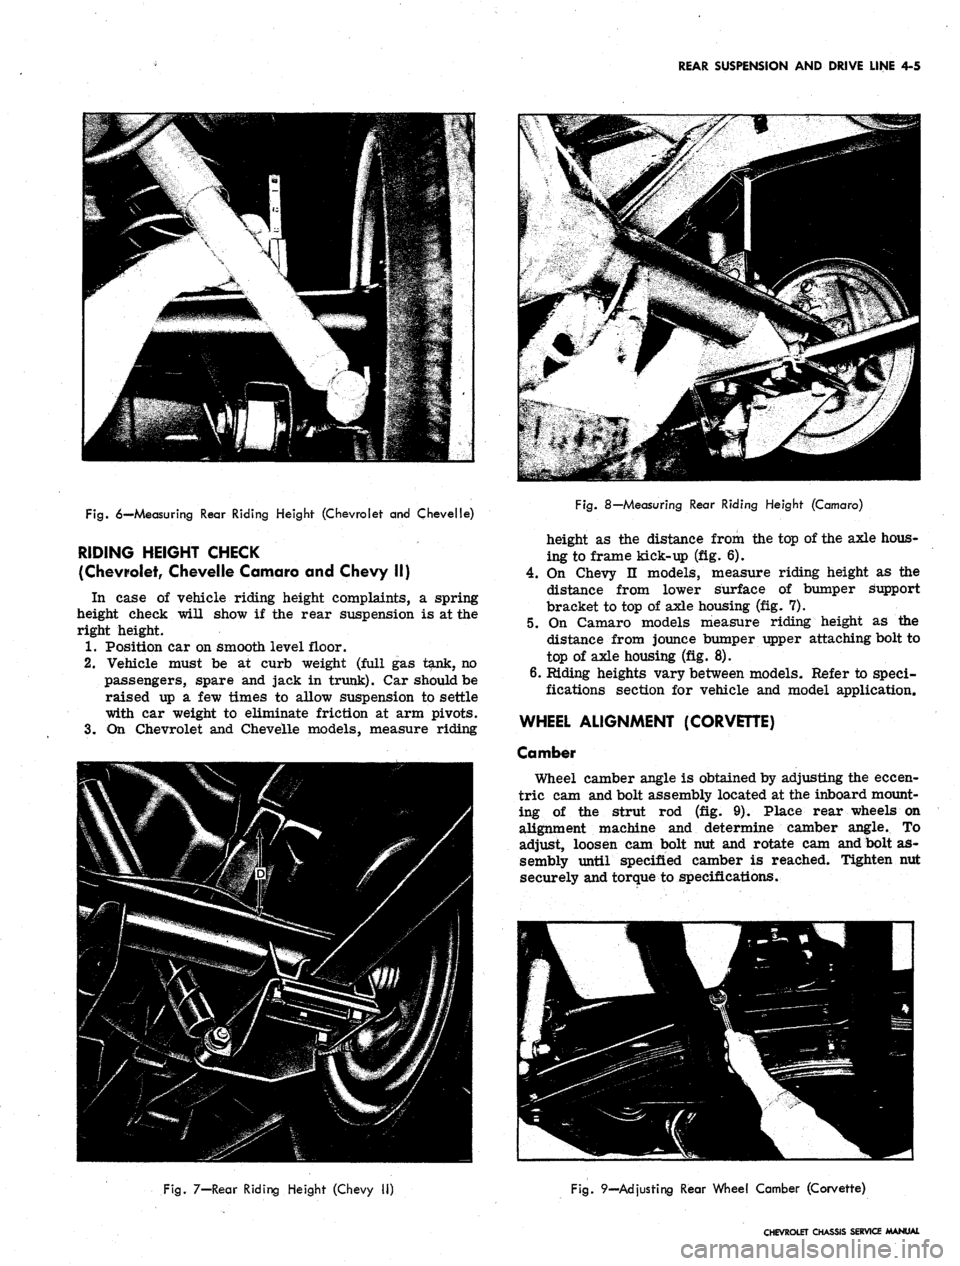 CHEVROLET CAMARO 1967 1.G Chassis Owners Guide 
REAR SUSPENSION AND DRIVE LINE 4-5

Fig.
 6—Measuring Rear Riding Height (Chevrolet and Chevelle)

RIDING HEIGHT CHECK

(Chevrolet, Chevelle Camaro and Chevy II)

In case of vehicle riding height c